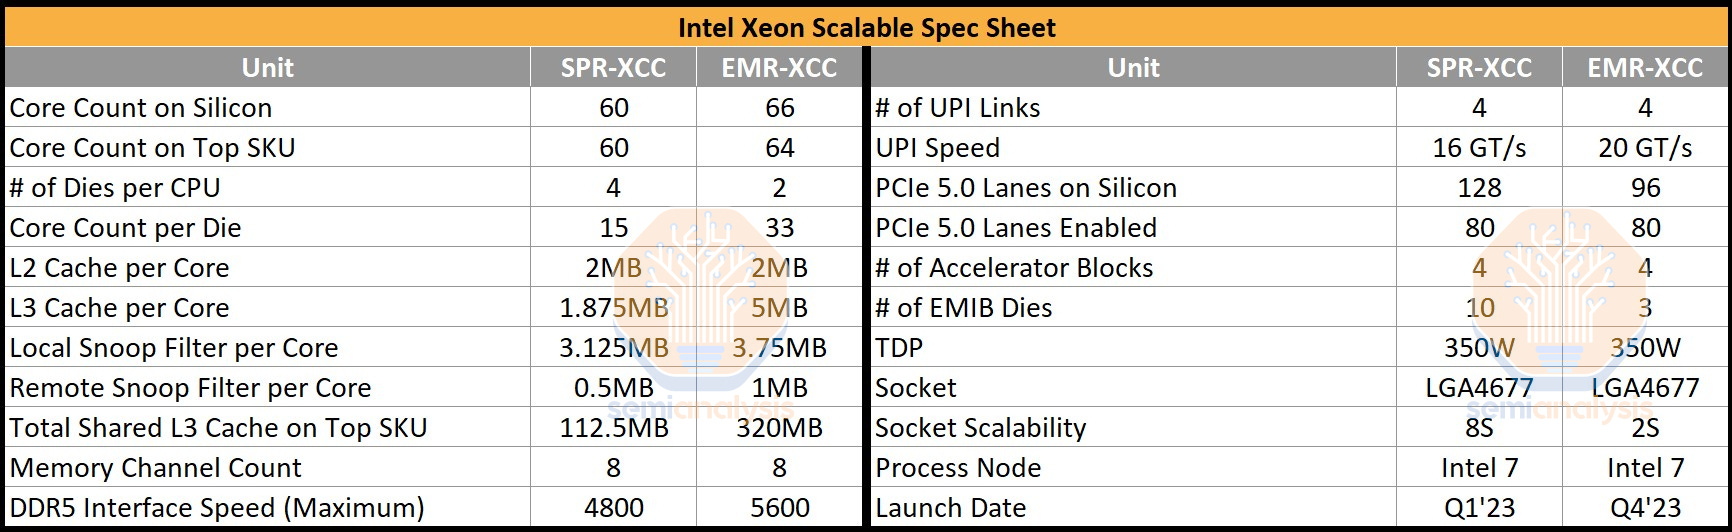 Getting started with the Intel Sapphire Rapids Xeon Max nodes